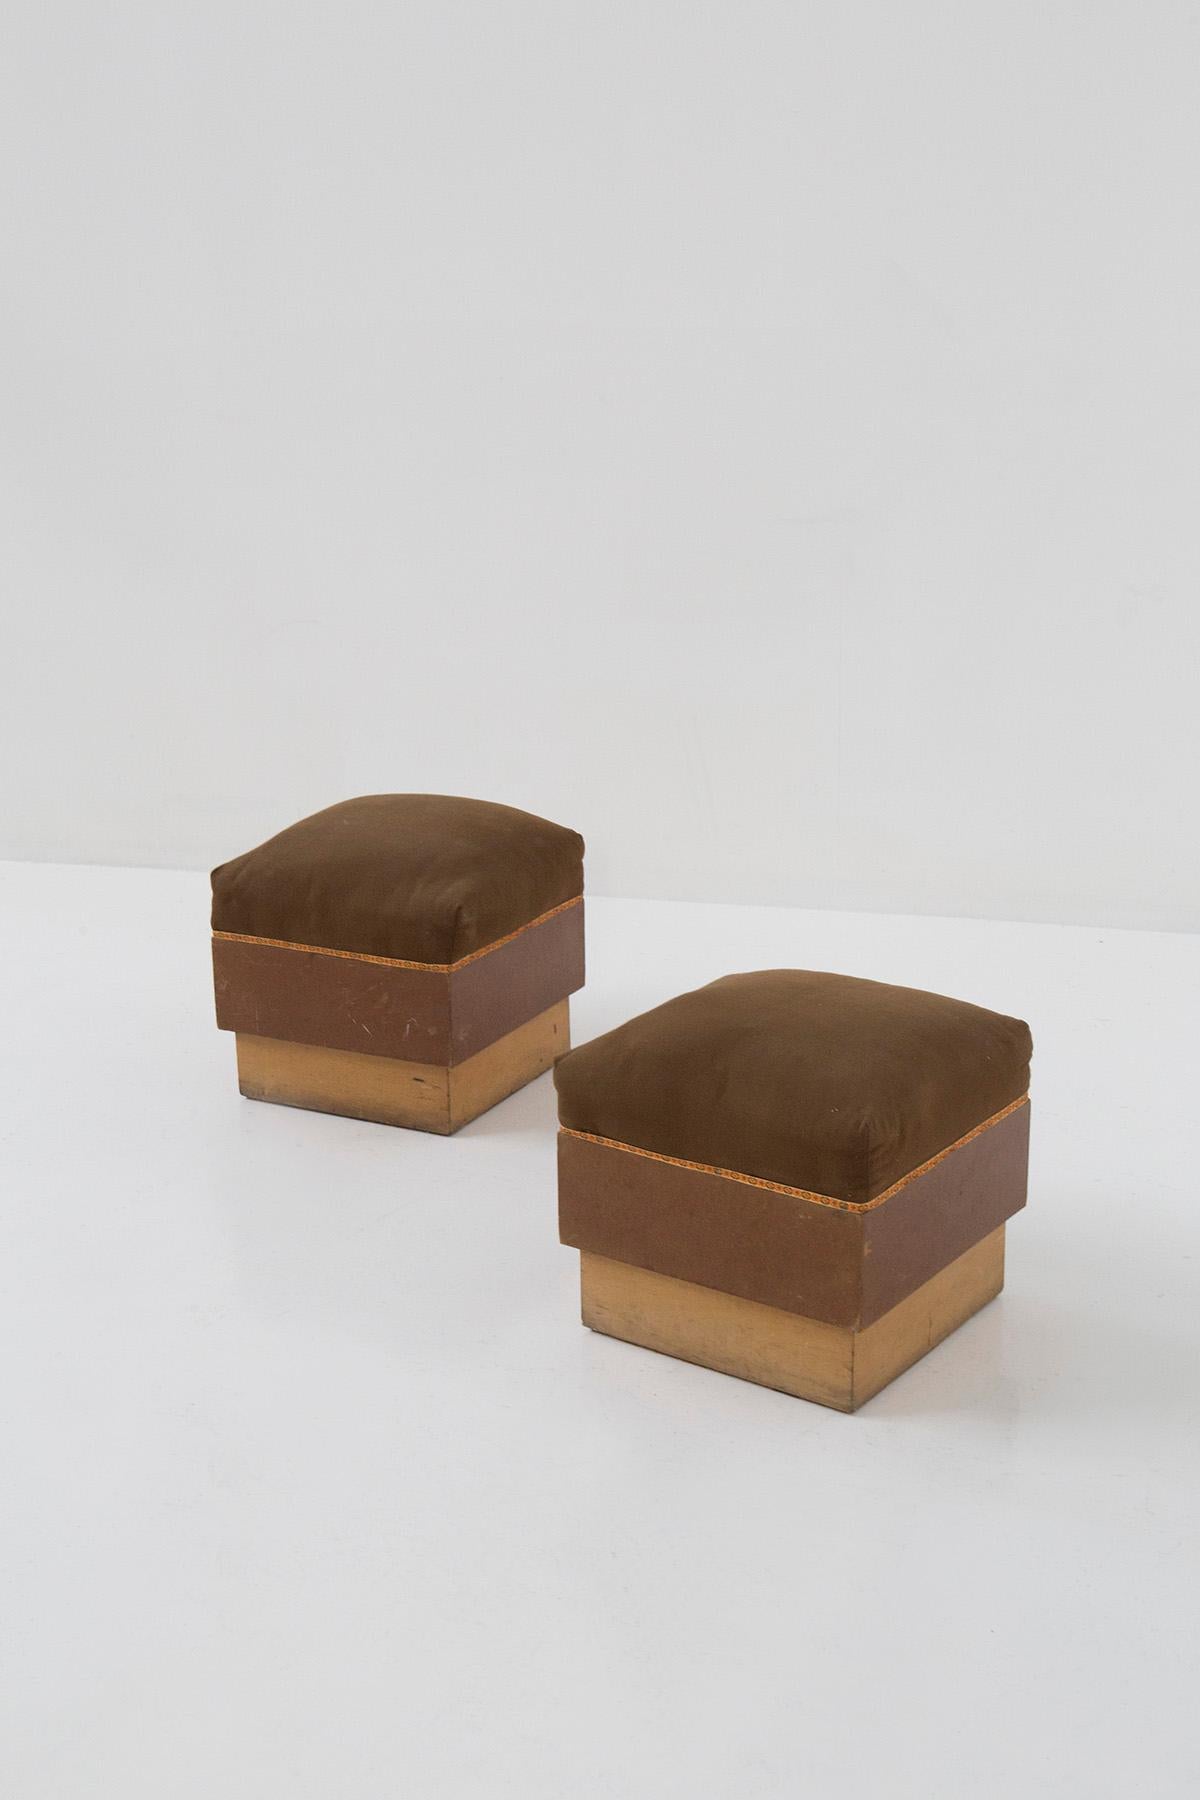 Elegant pair of Italian Art Deco poufs from the 1930s. The poufs have a simple but at the same time very important and classic line. Made with a wooden frame in a square shape, this pair of ottomans are the perfect Art Deco furnishing accessory that